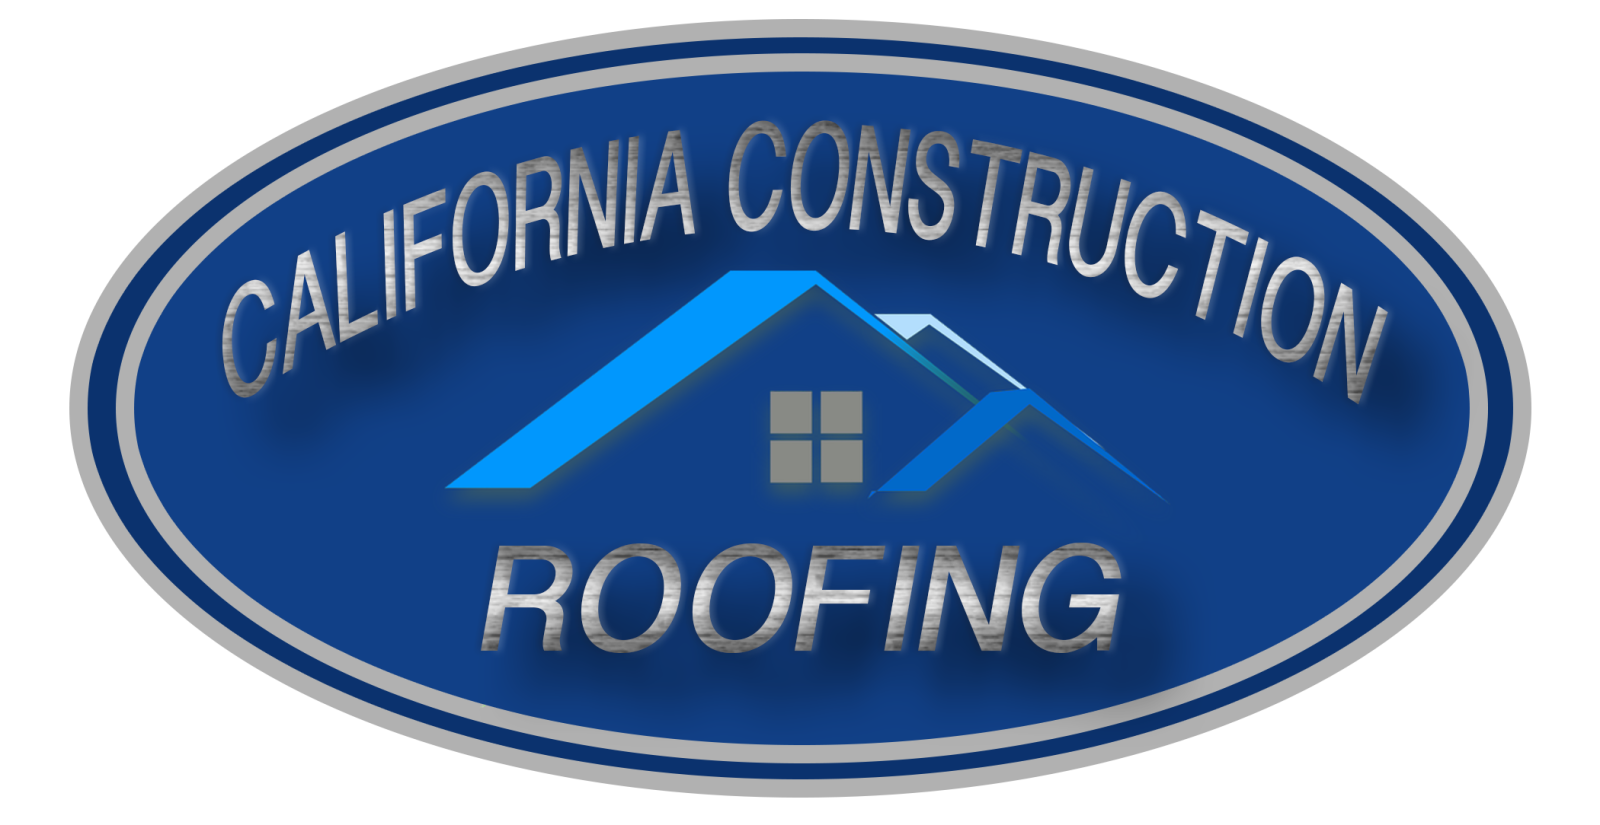 California Construction & Roofing